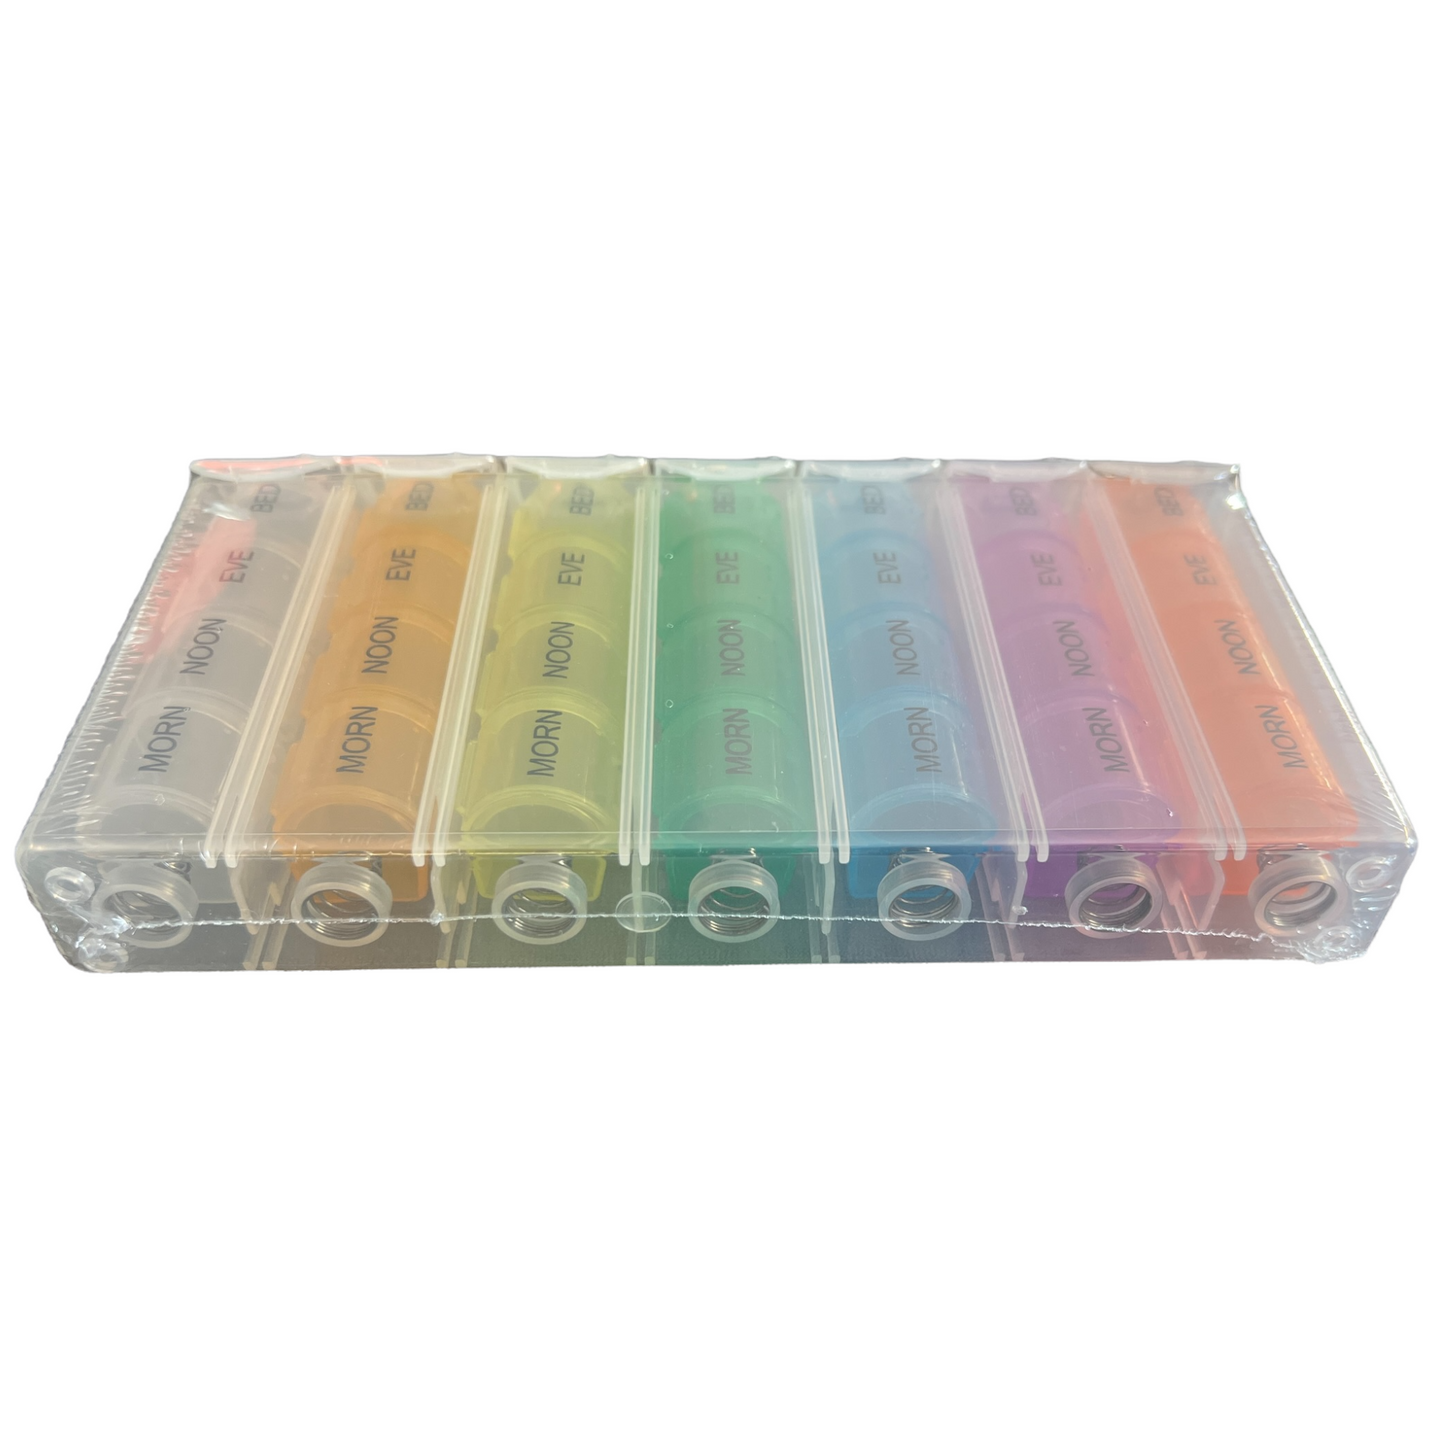 7 Day Pill Box — 4 Doses Daily Pop Out Case Managing Medications SPIRIT SPARKPLUGS   